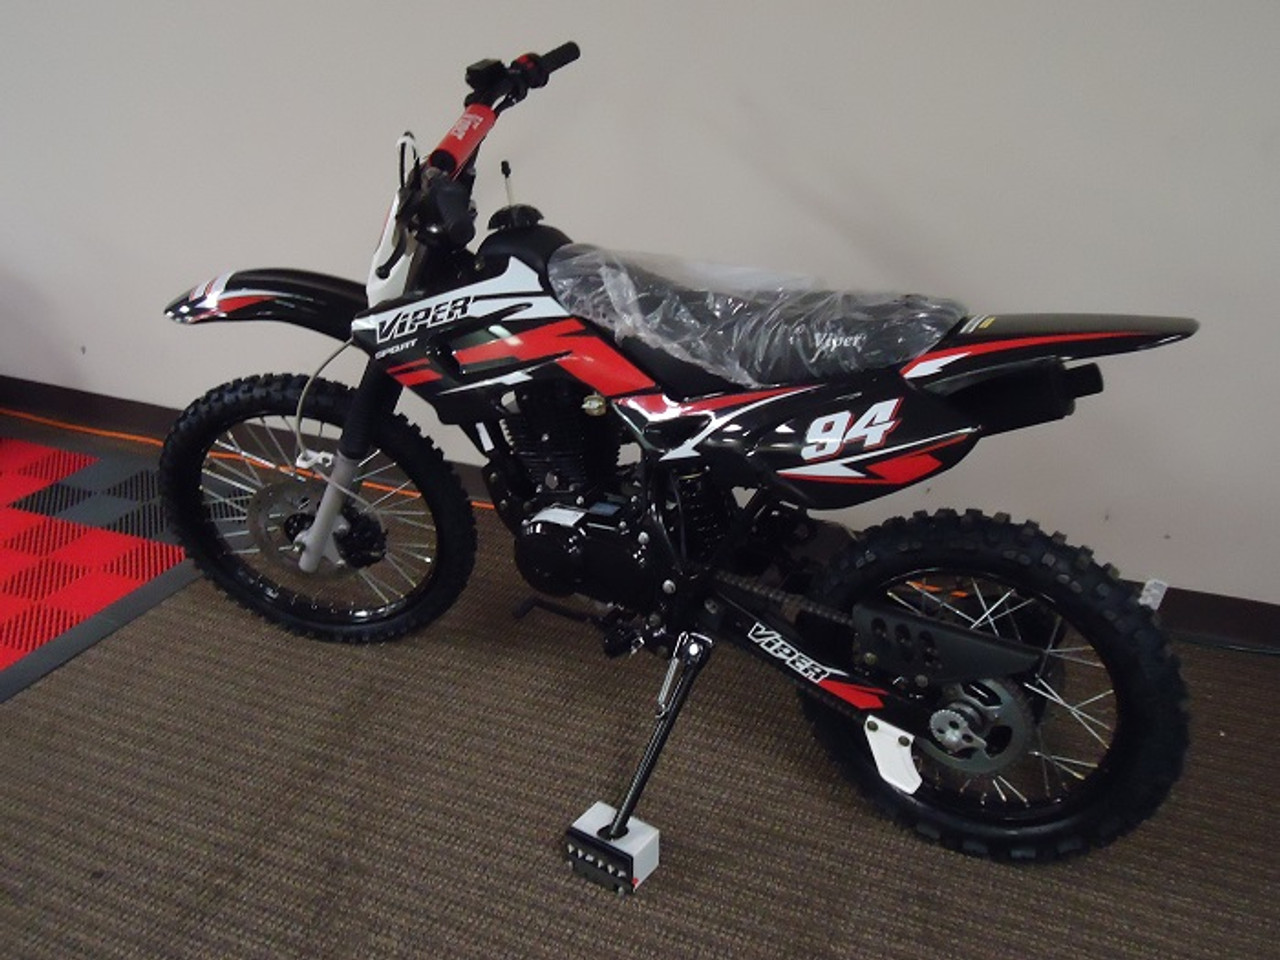 RPS DB-Viper 150CC Dirt Bike, 4 Stroke Displacement, Air Cooling - Fully Assembled And Tested